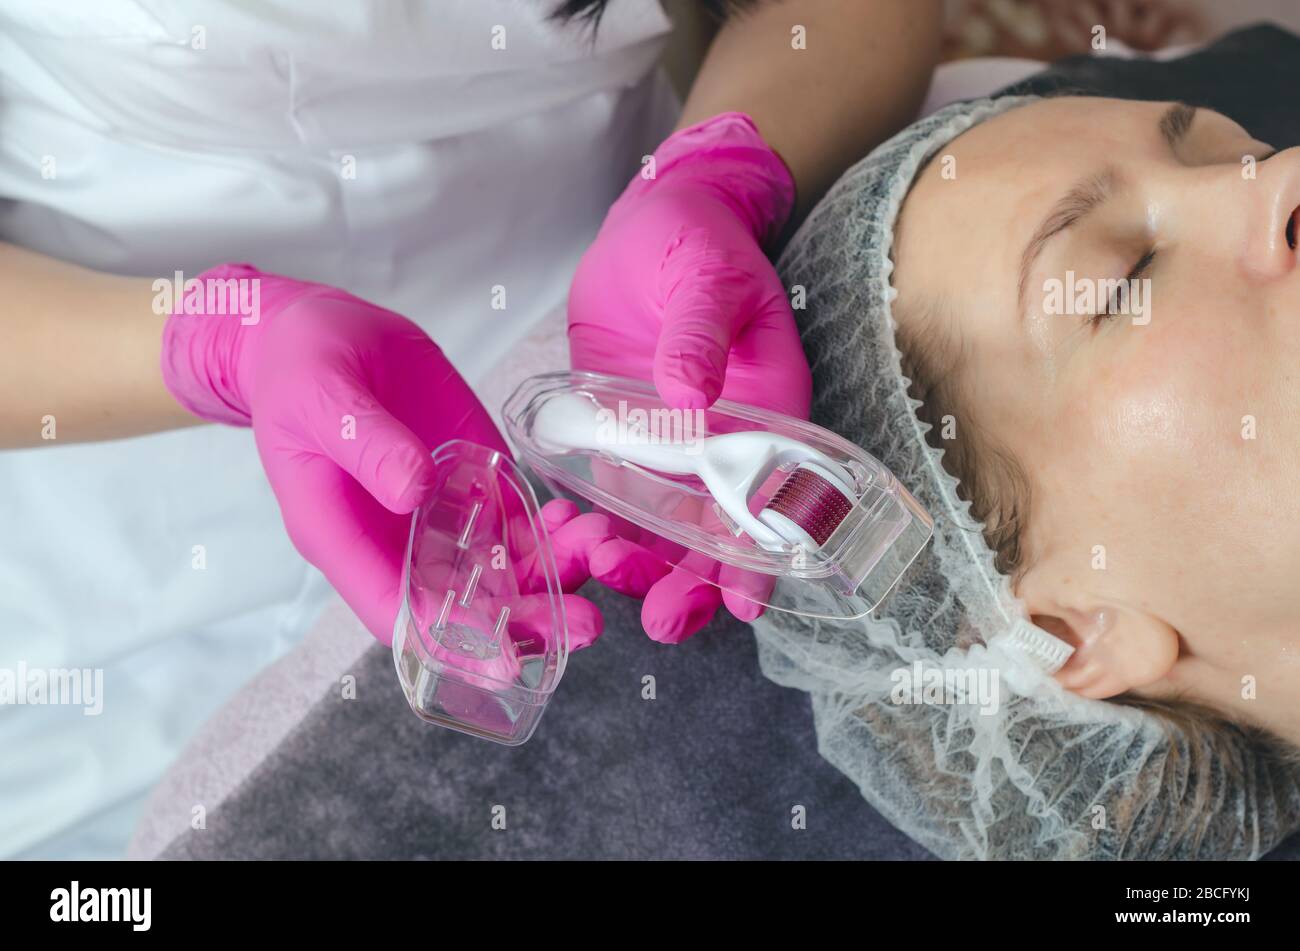 Cosmetologist shows mesoscooter close-up. Carrying out anti-aging treatments in spa Stock Photo